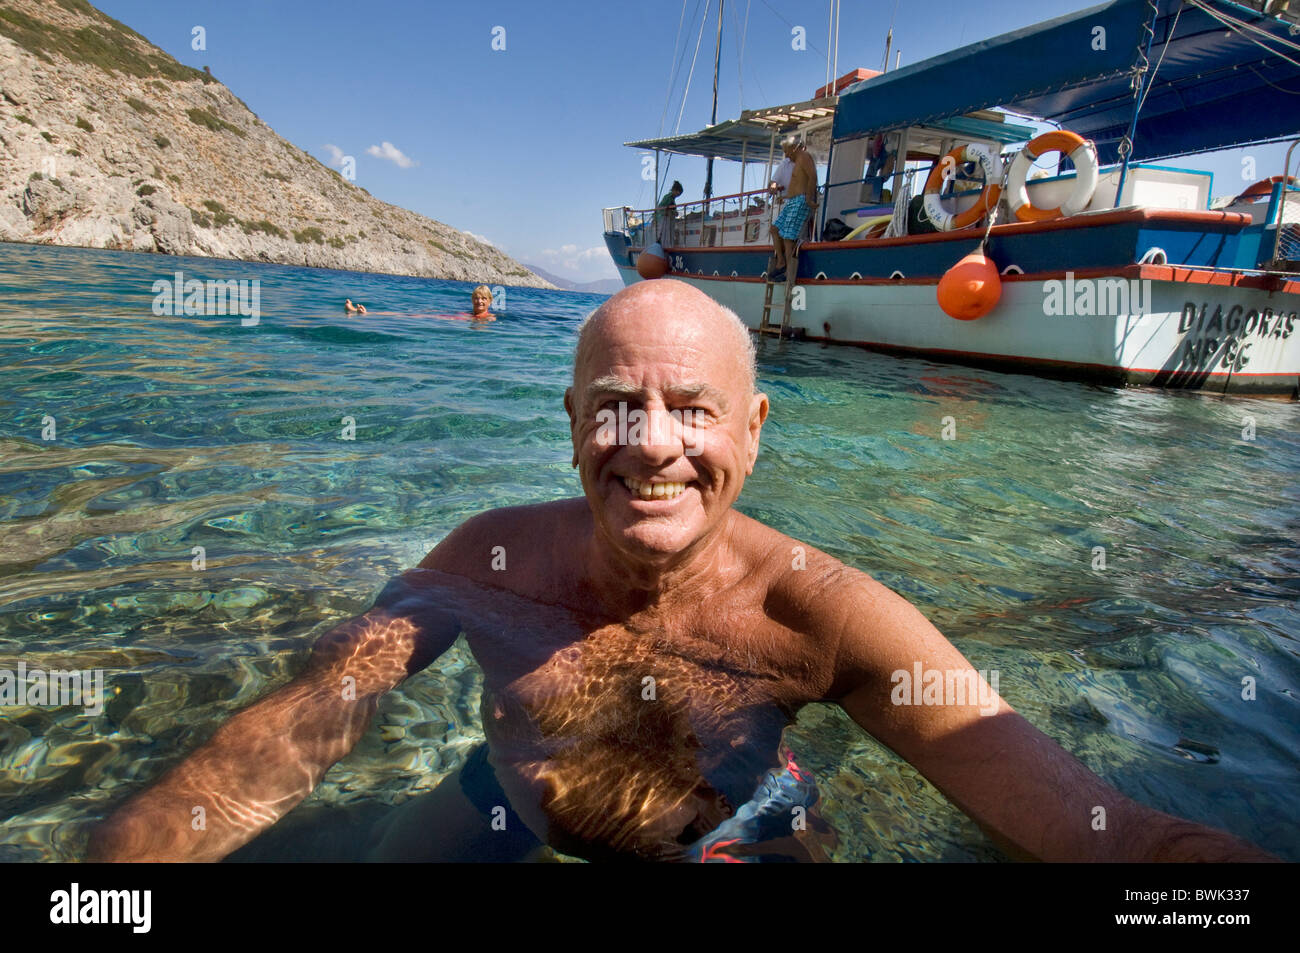 Fit, healthy, tanned older man smiling at camera as he swims in the sea off the Greek Island of Symi Stock Photo